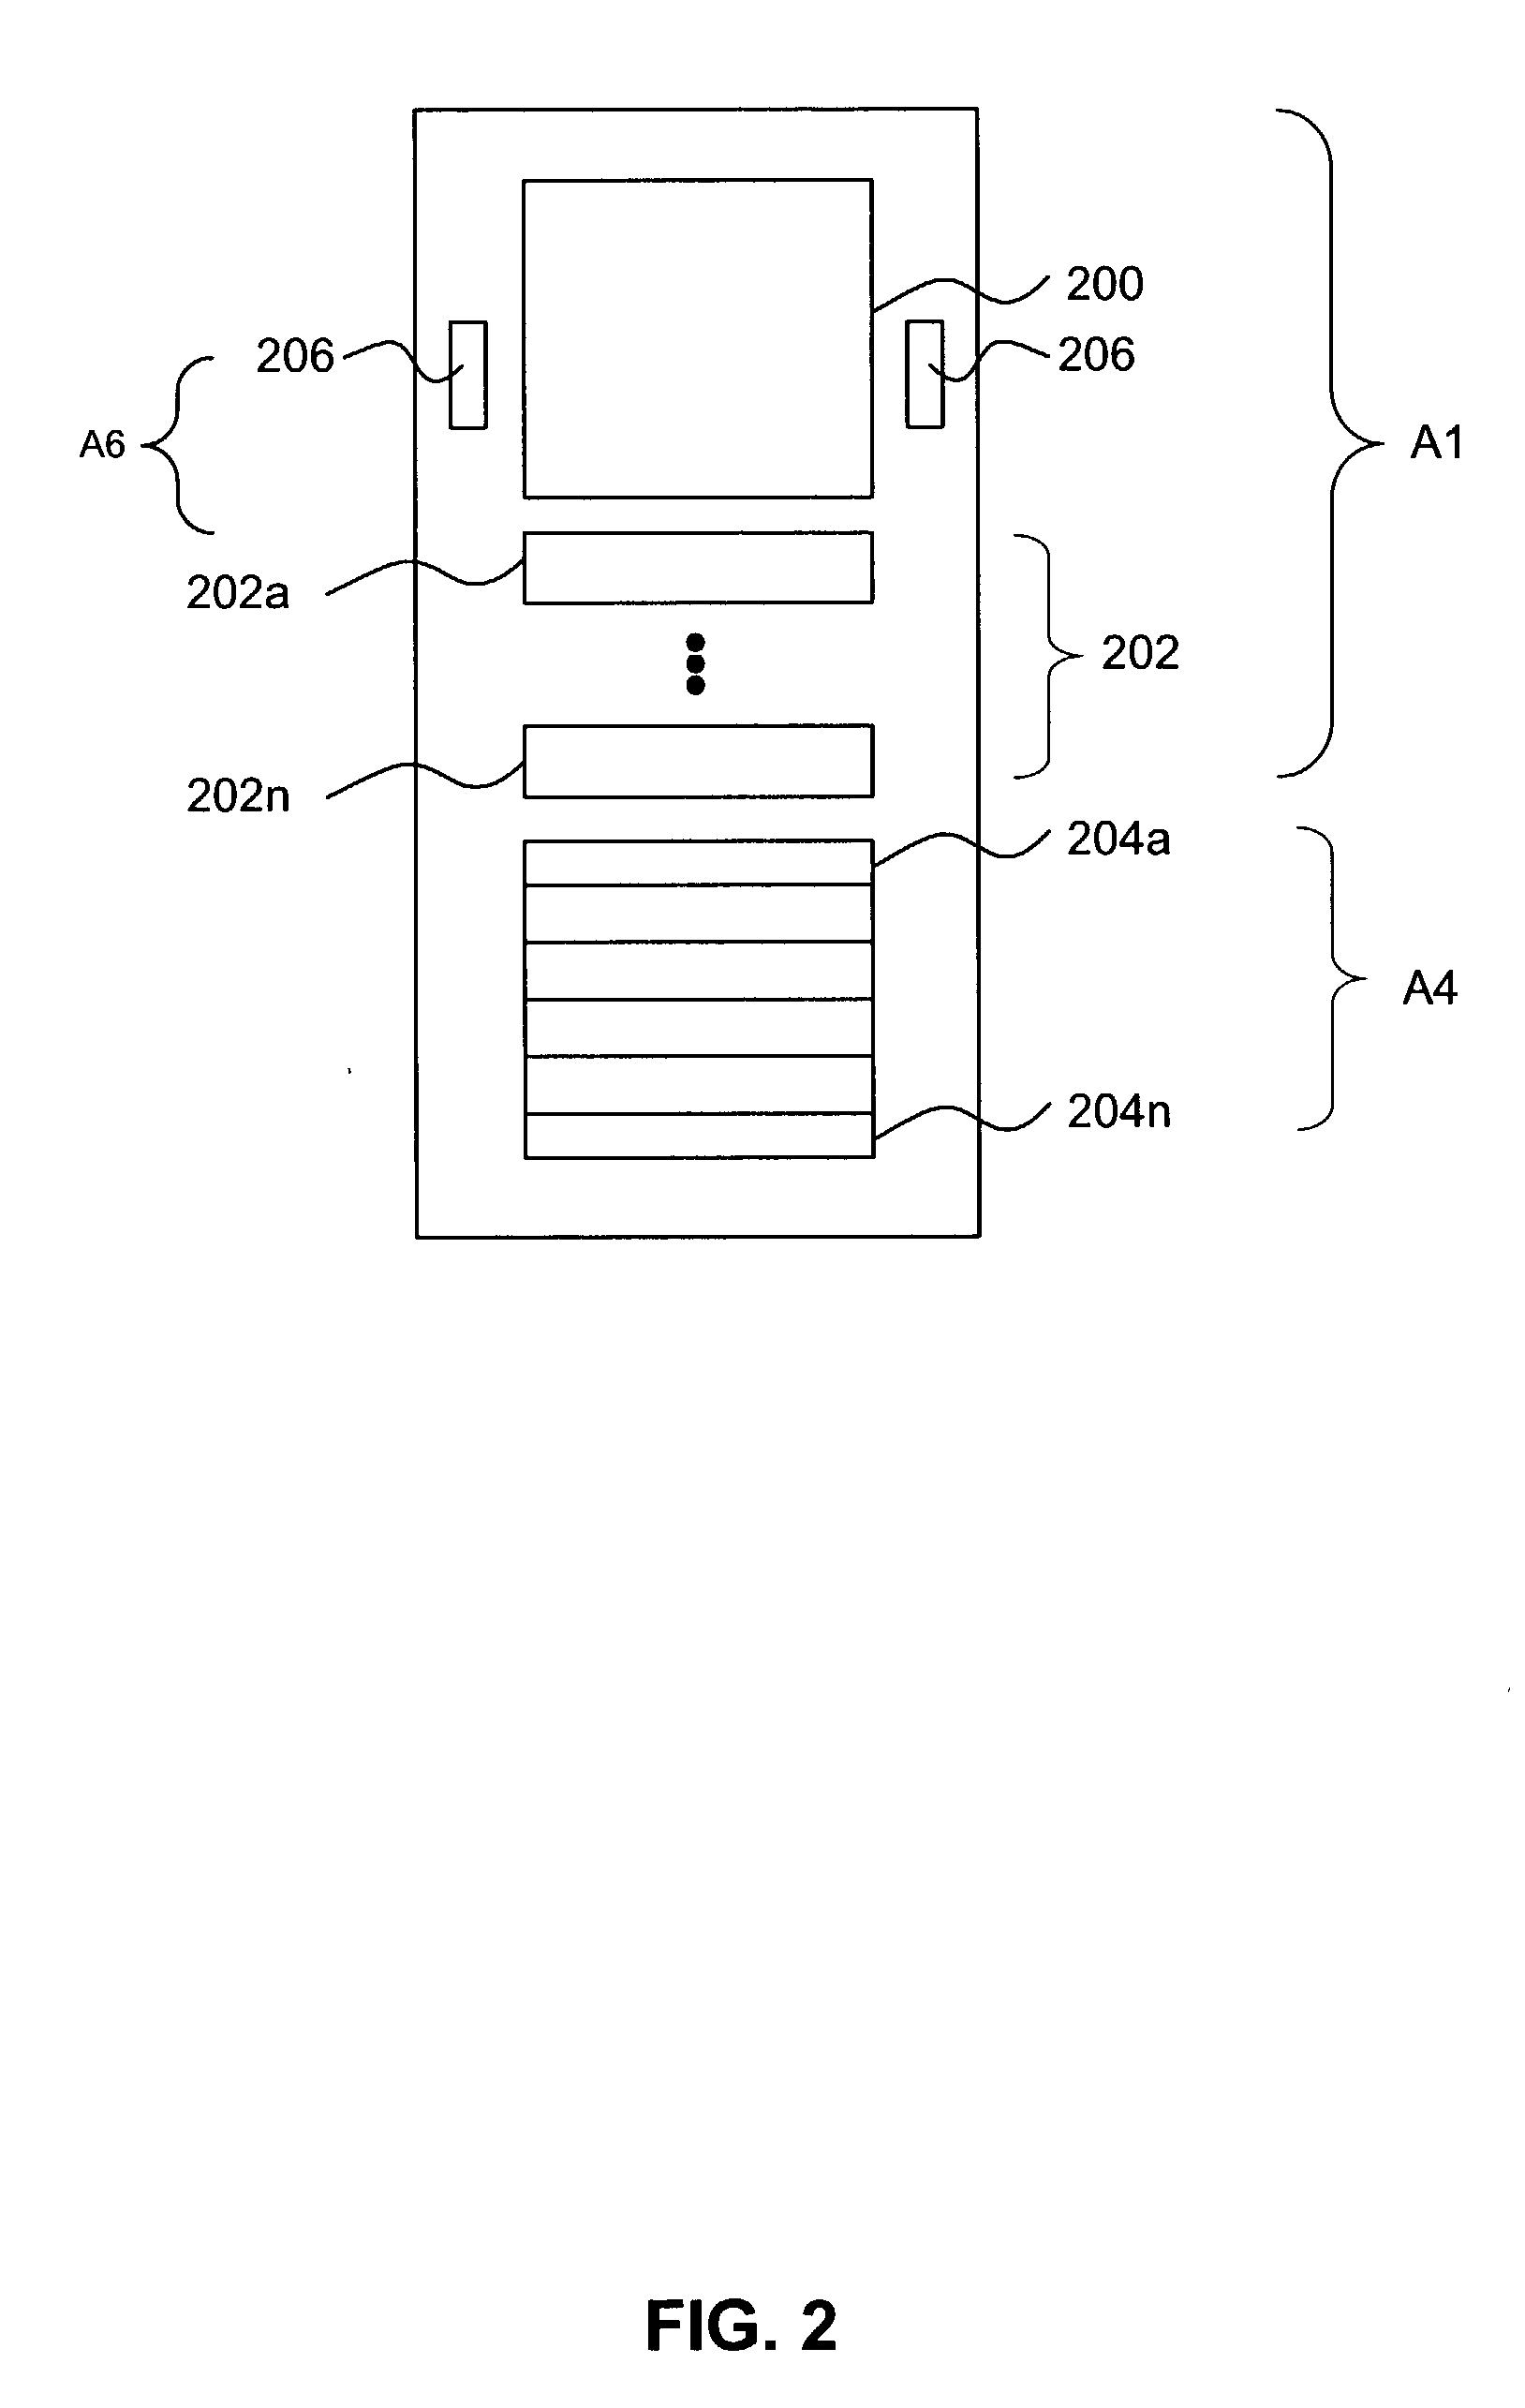 System and method to monitor materials containing smart tags to generate business intelligence